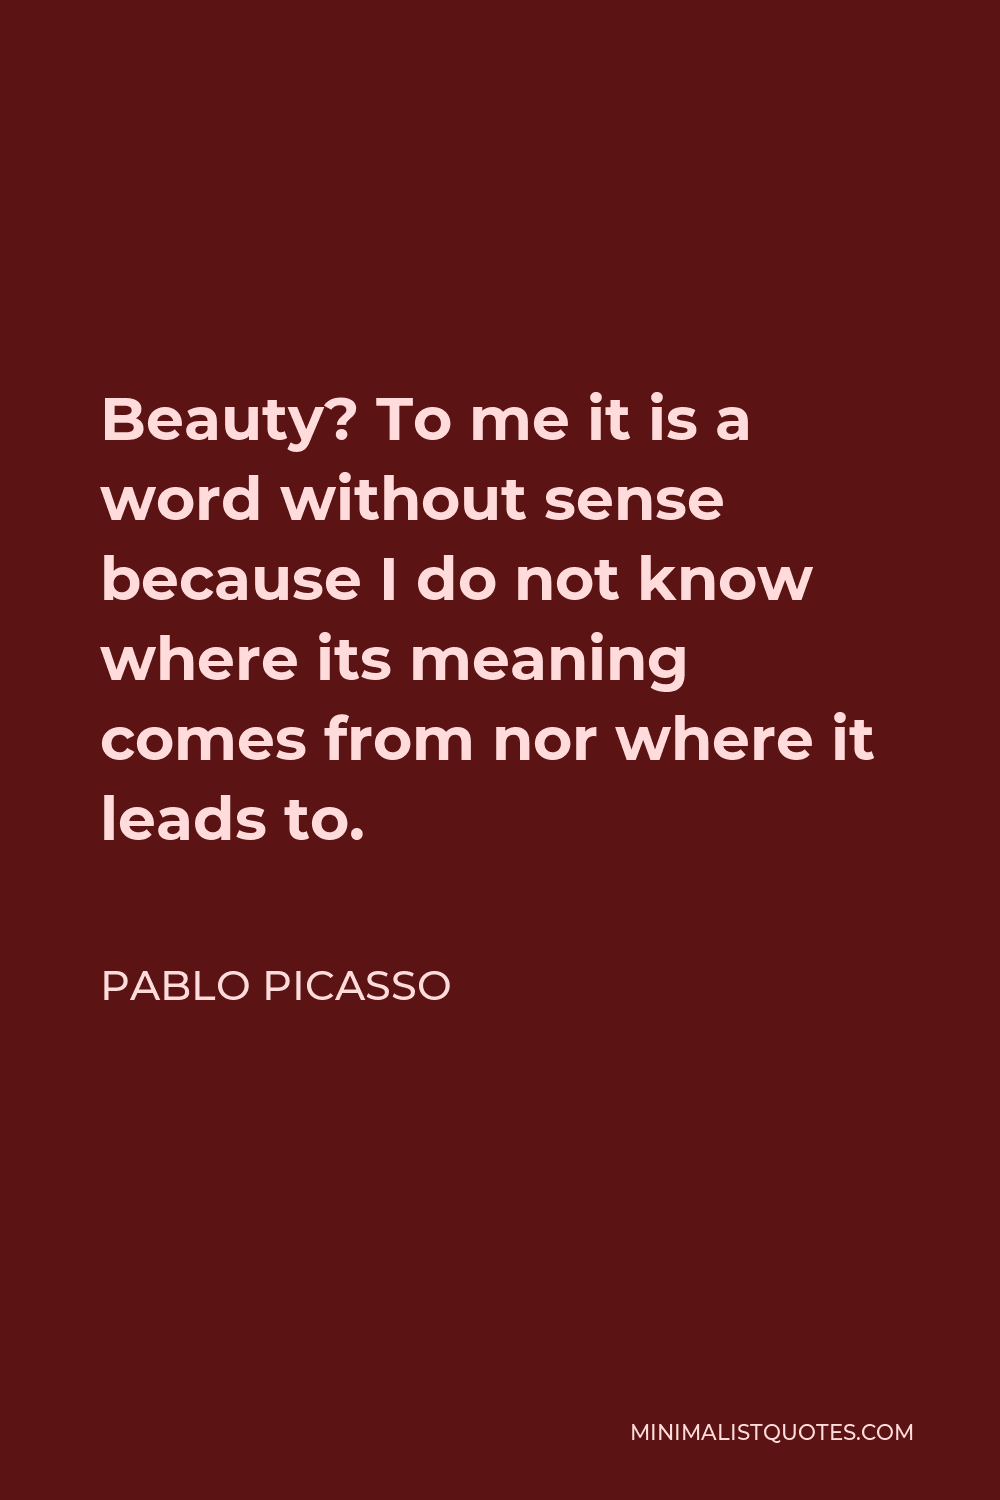 Pablo Picasso Quote - Beauty? To me it is a word without sense because I do not know where its meaning comes from nor where it leads to.